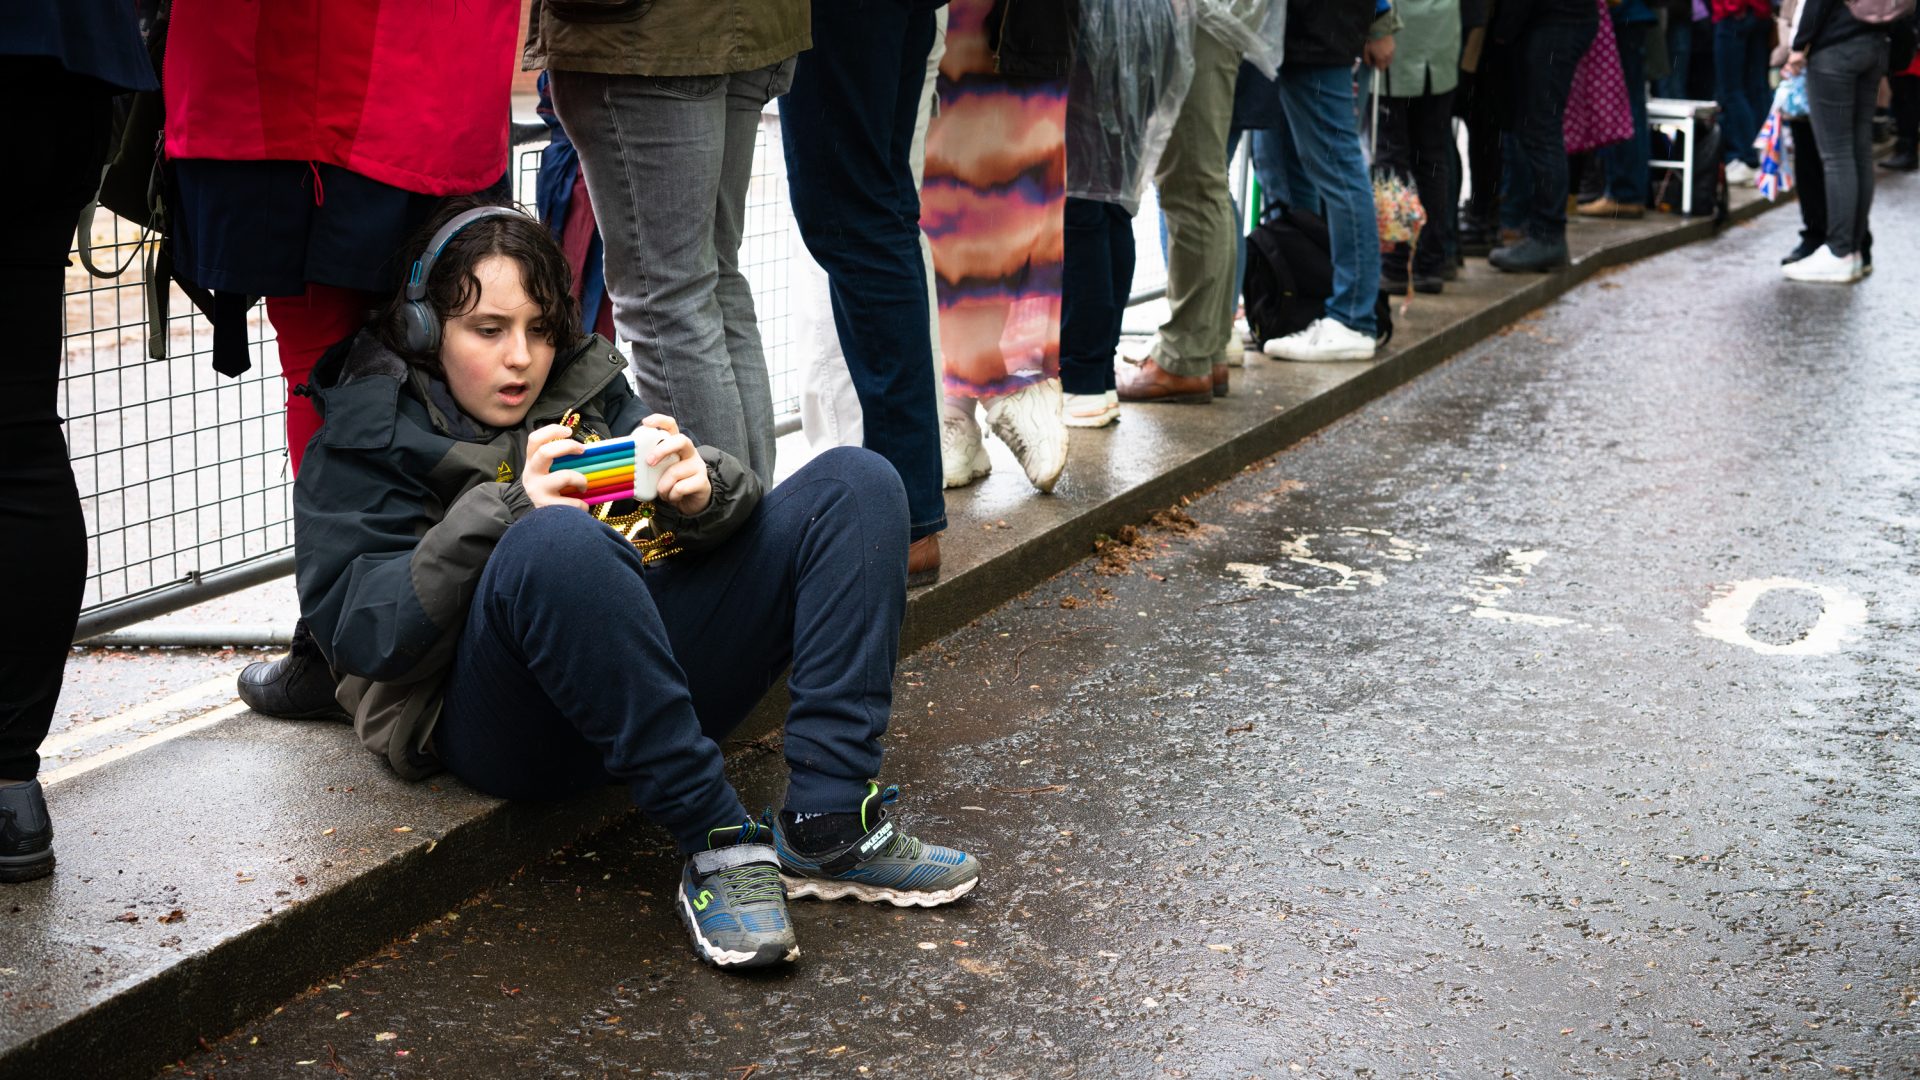 A child sits on the kerb with his phone against a backdrop of queuers.